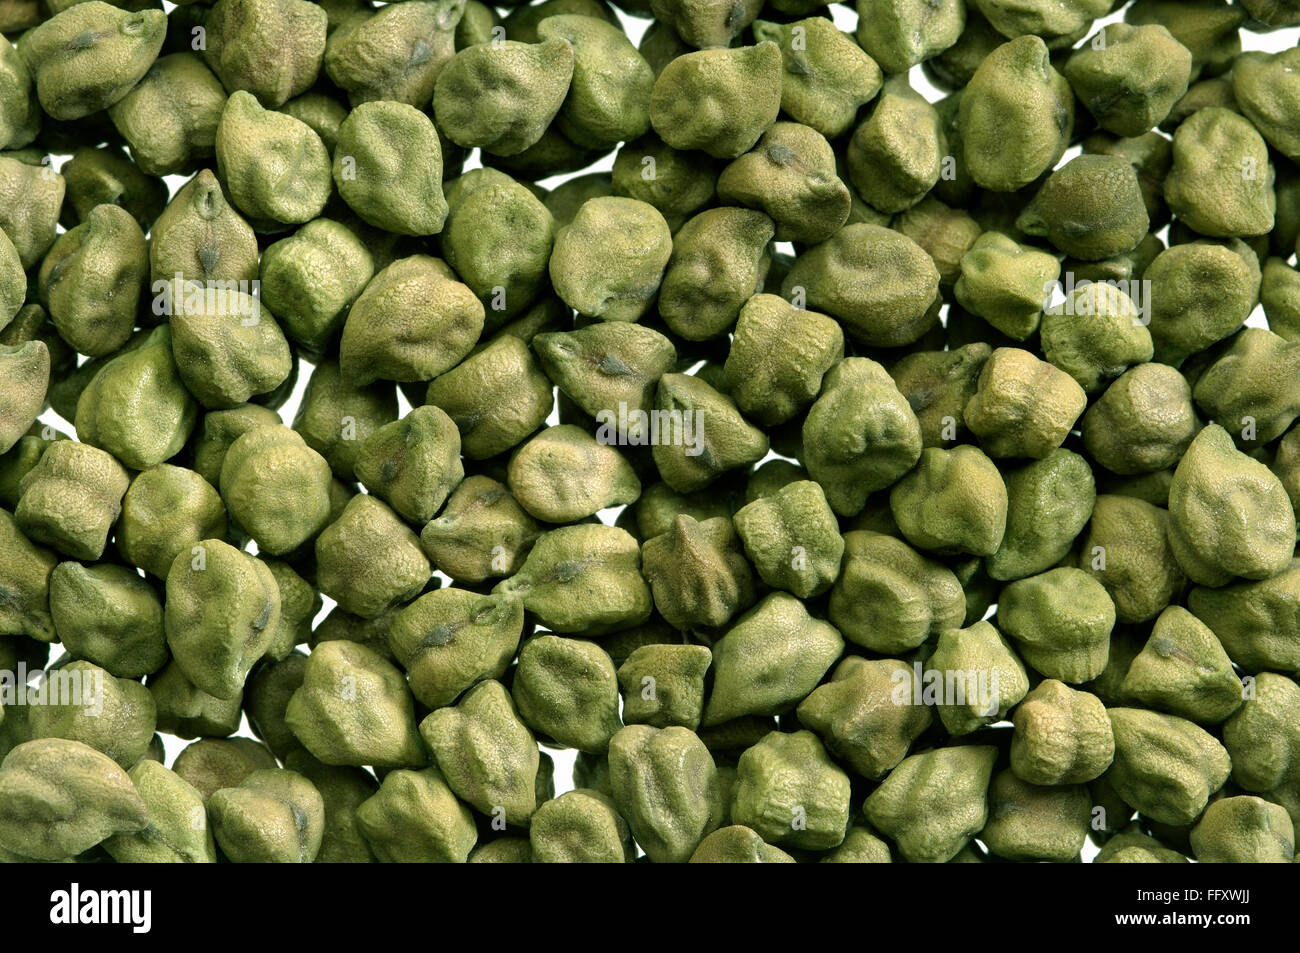 Grain , pulse green chick peas whole green gram or channa on white background Stock Photo